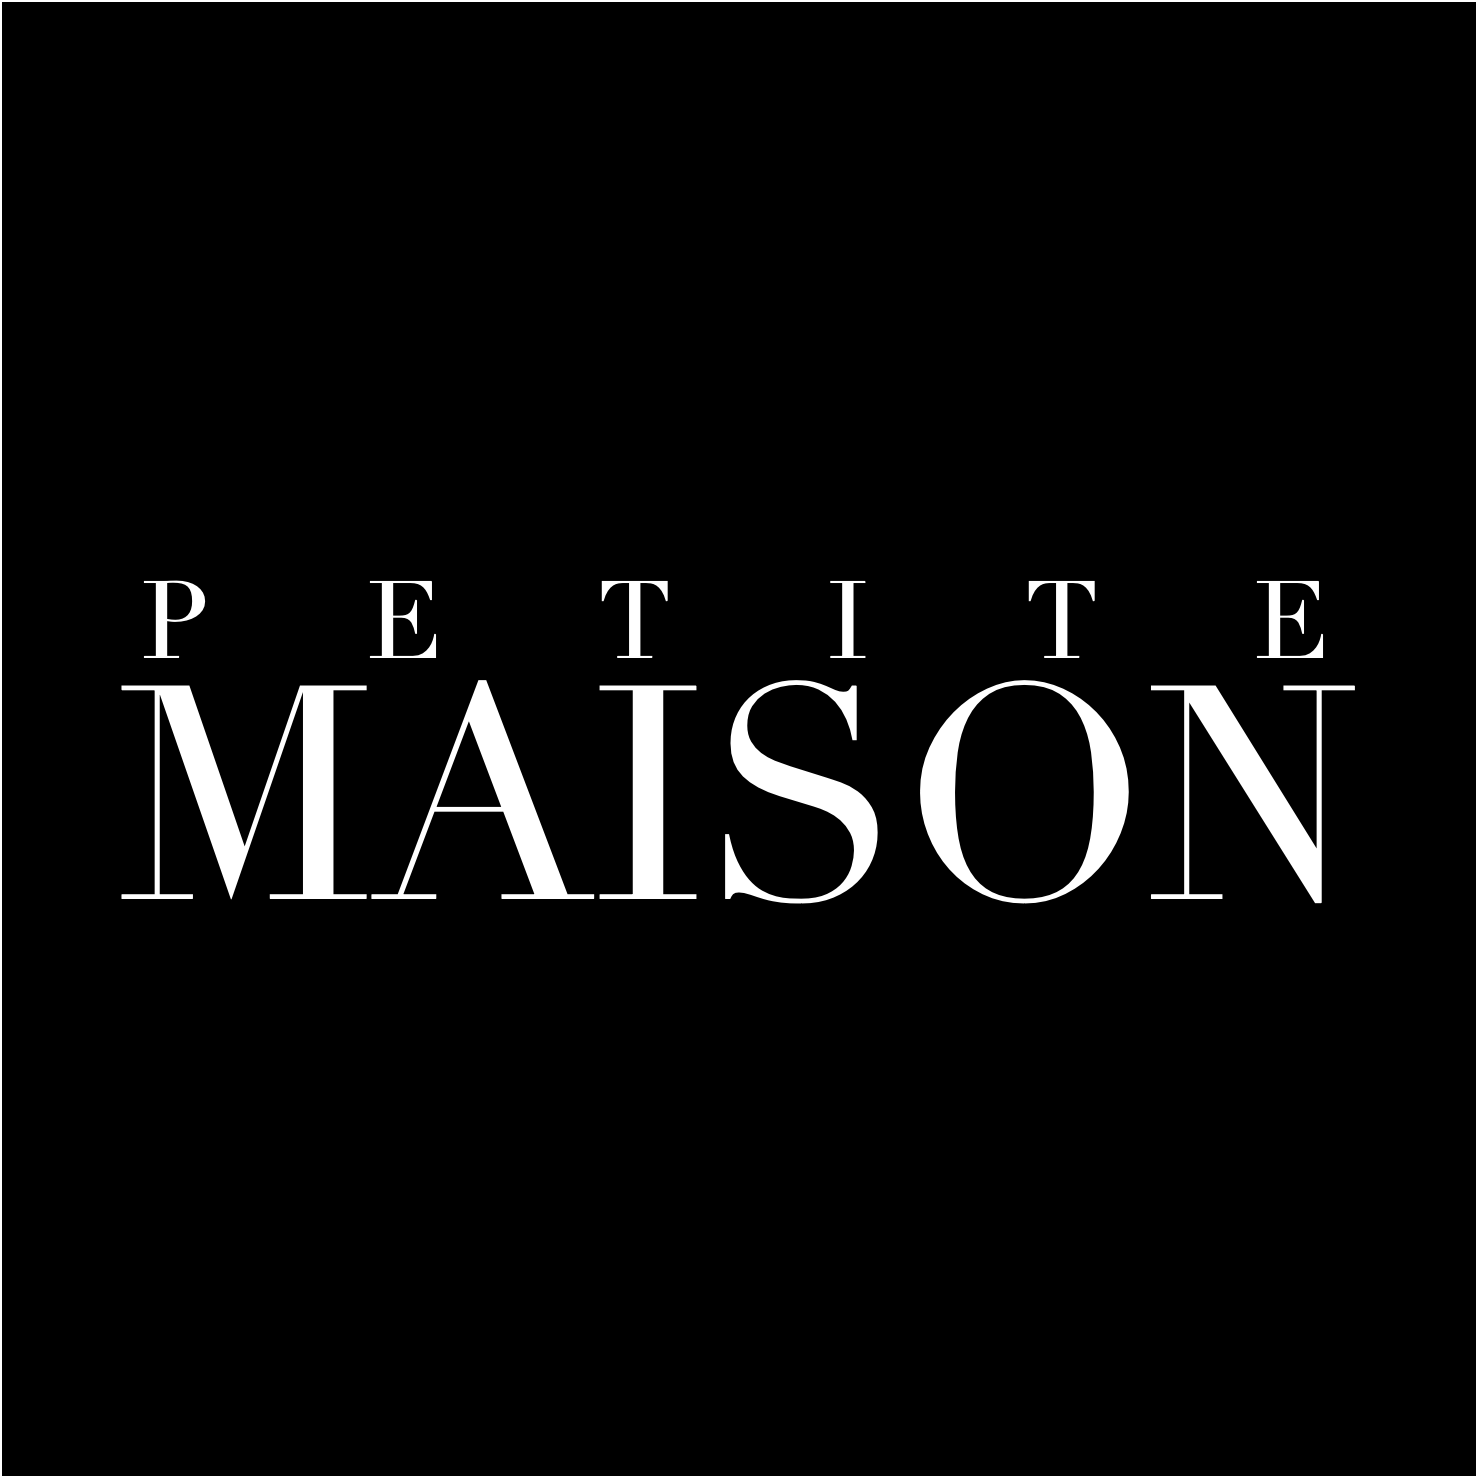 Petite Maison Brasserie - Order online for delivery & pickup!